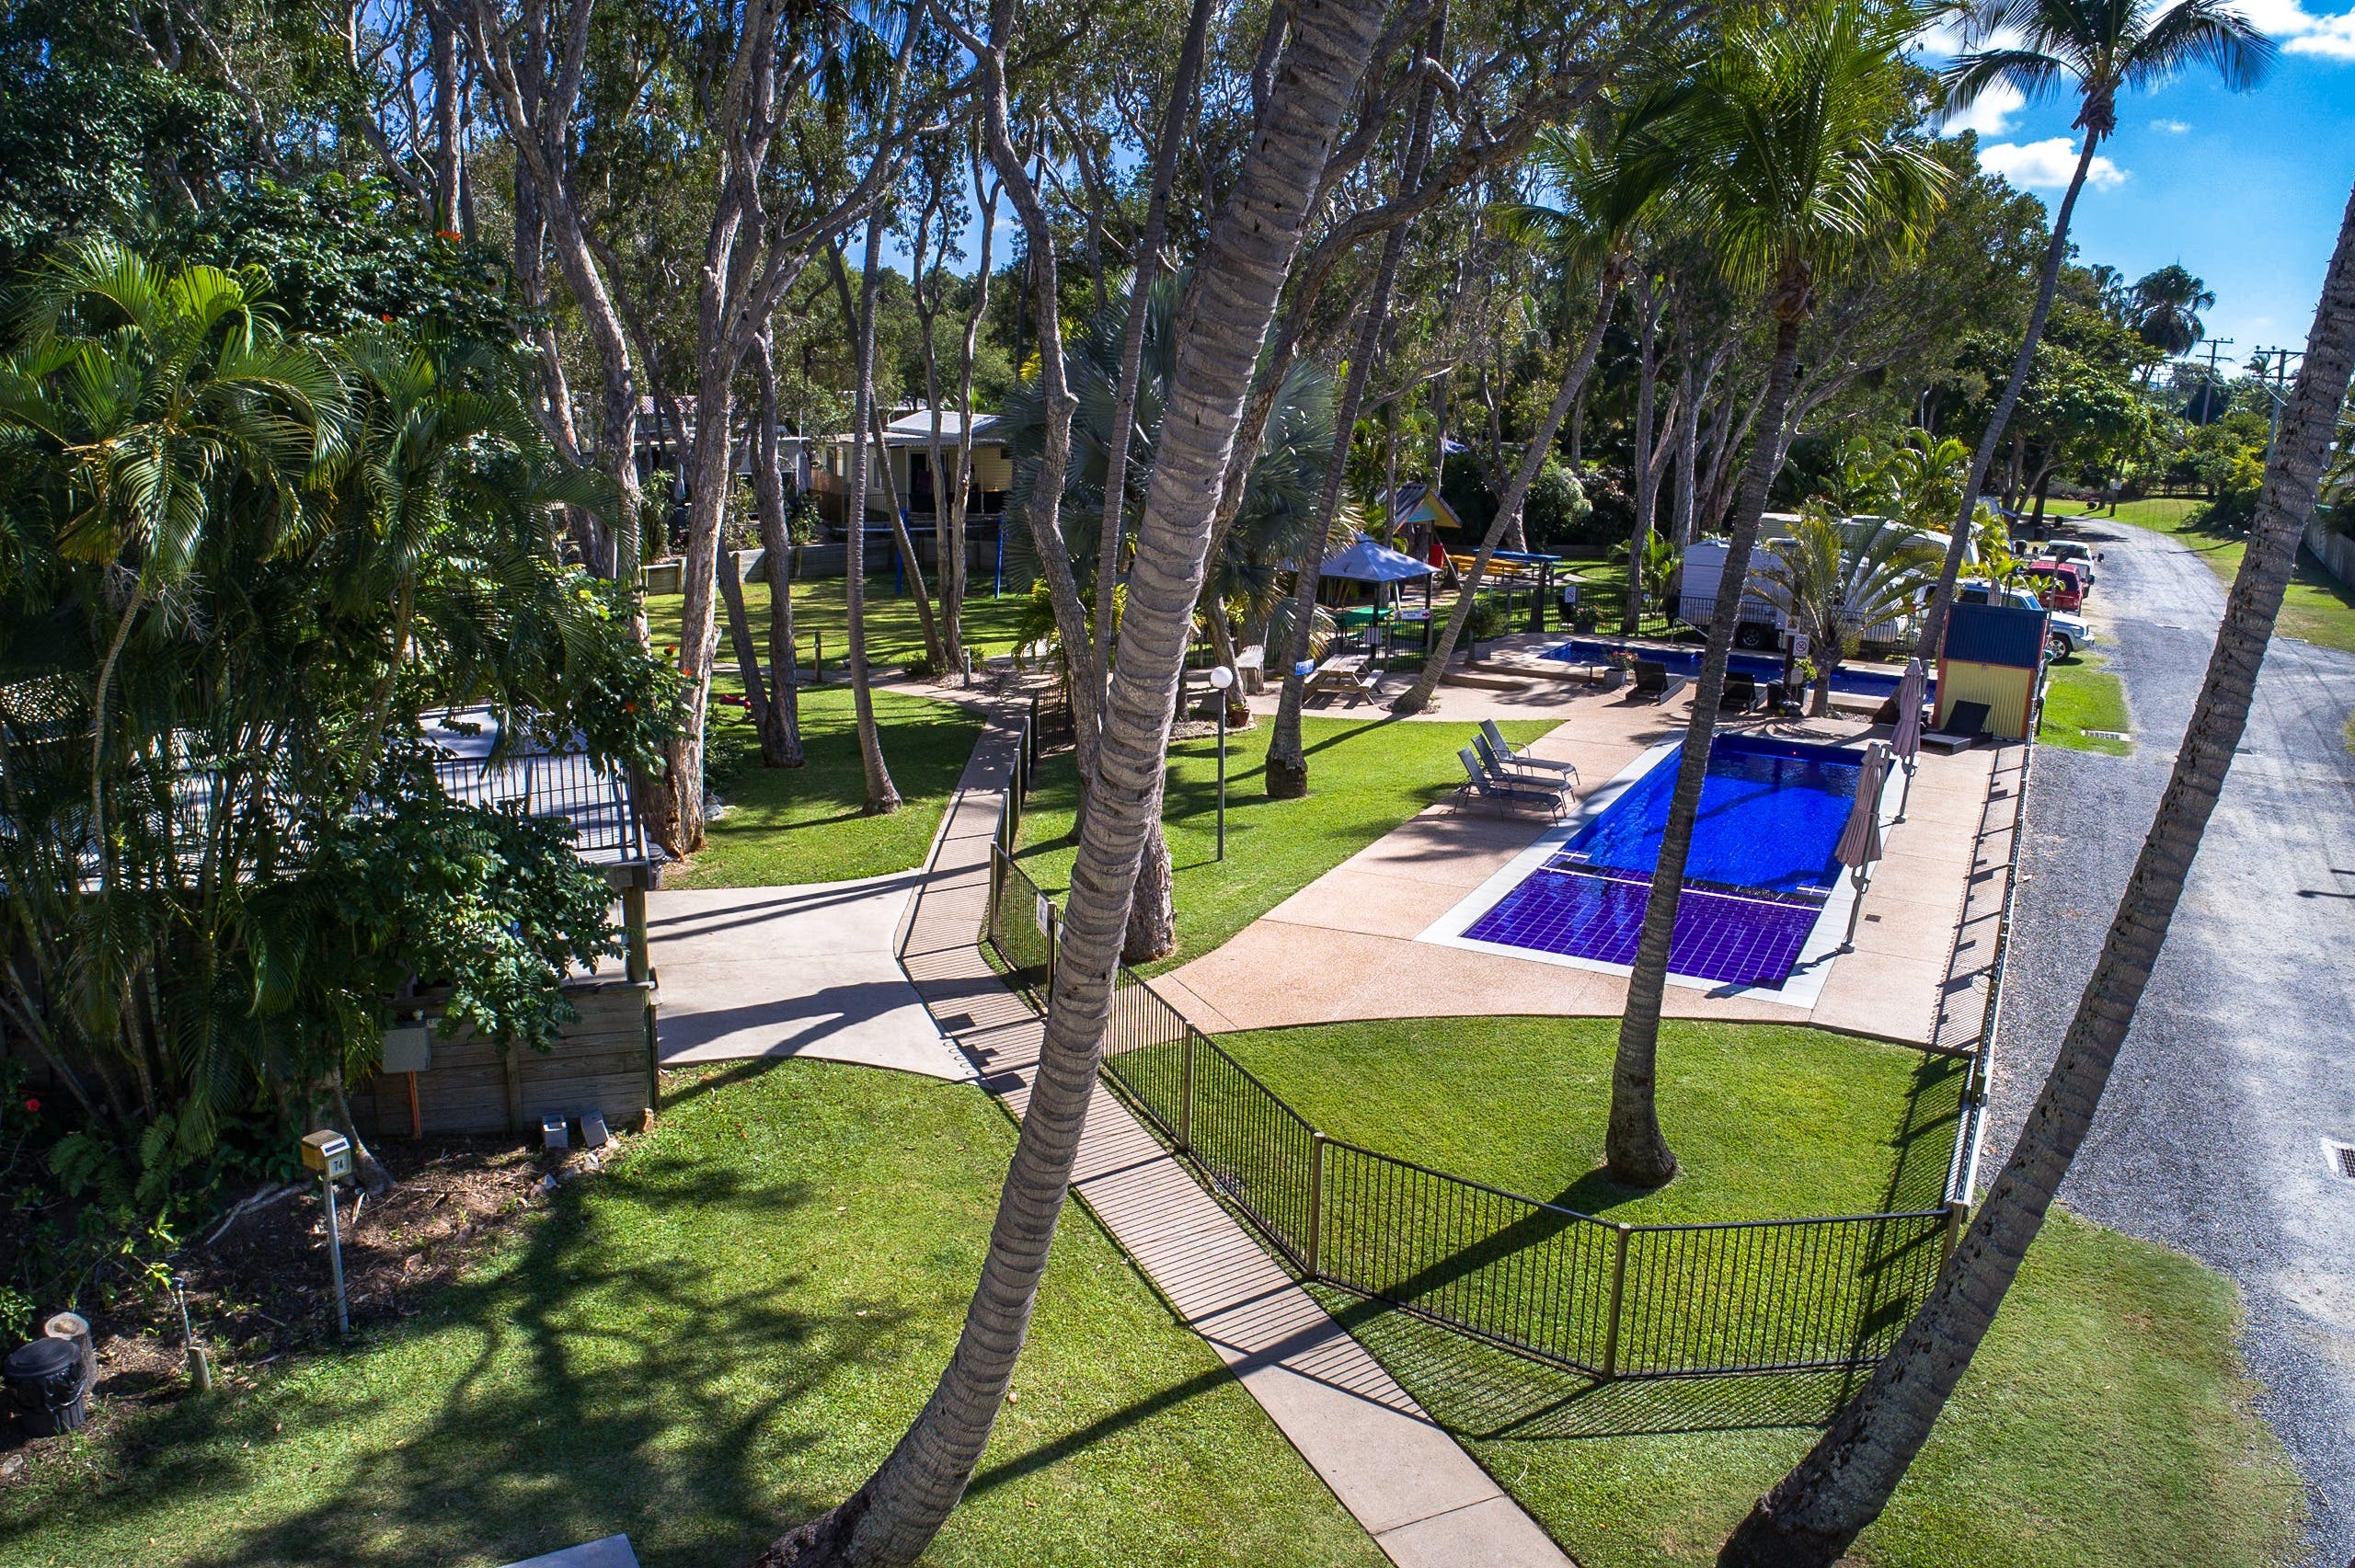 Island View Caravan Park - Accommodation Redcliffe